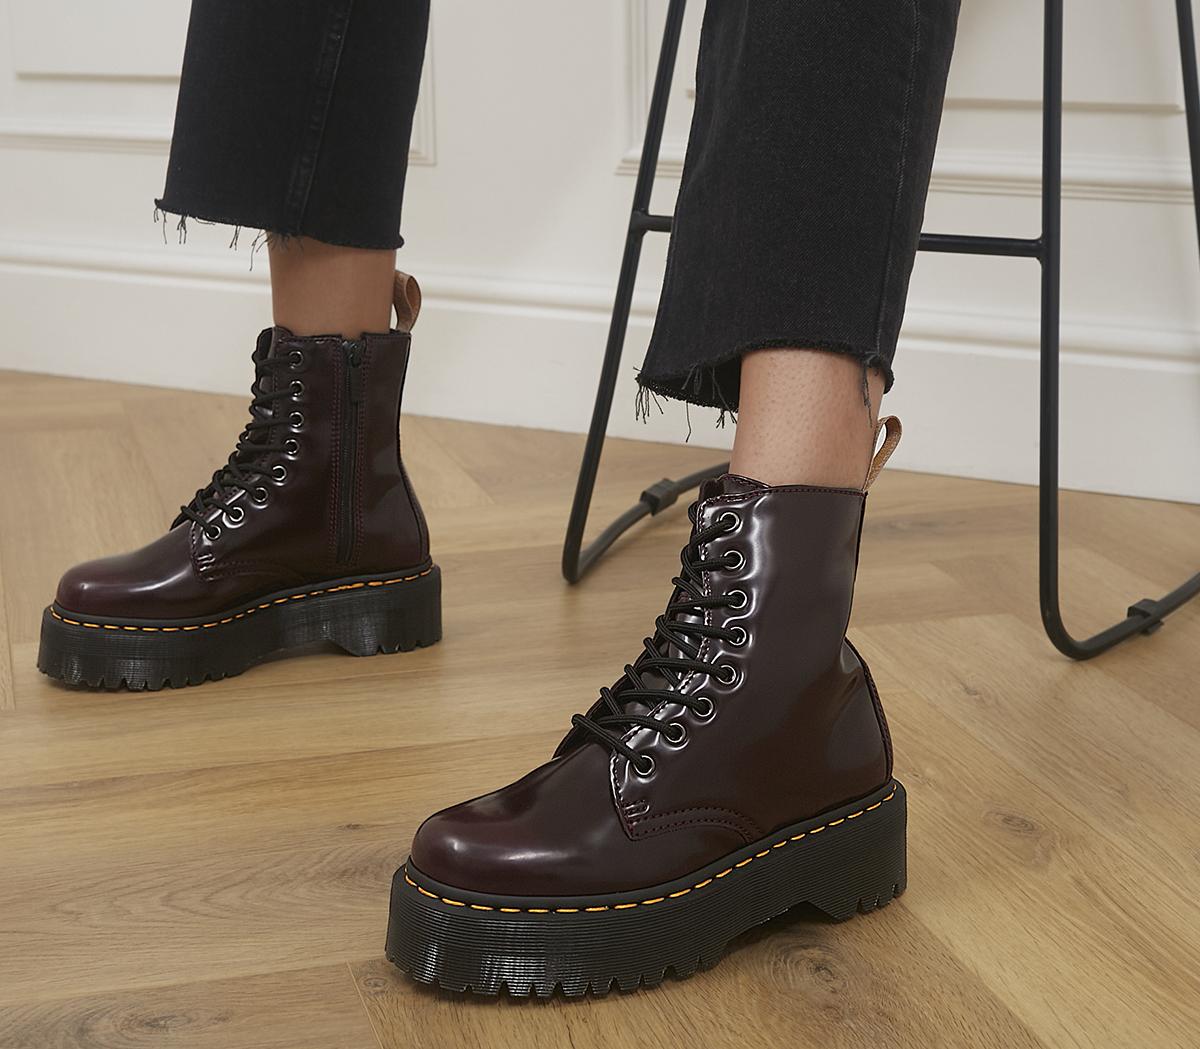 doc martens meadowhall